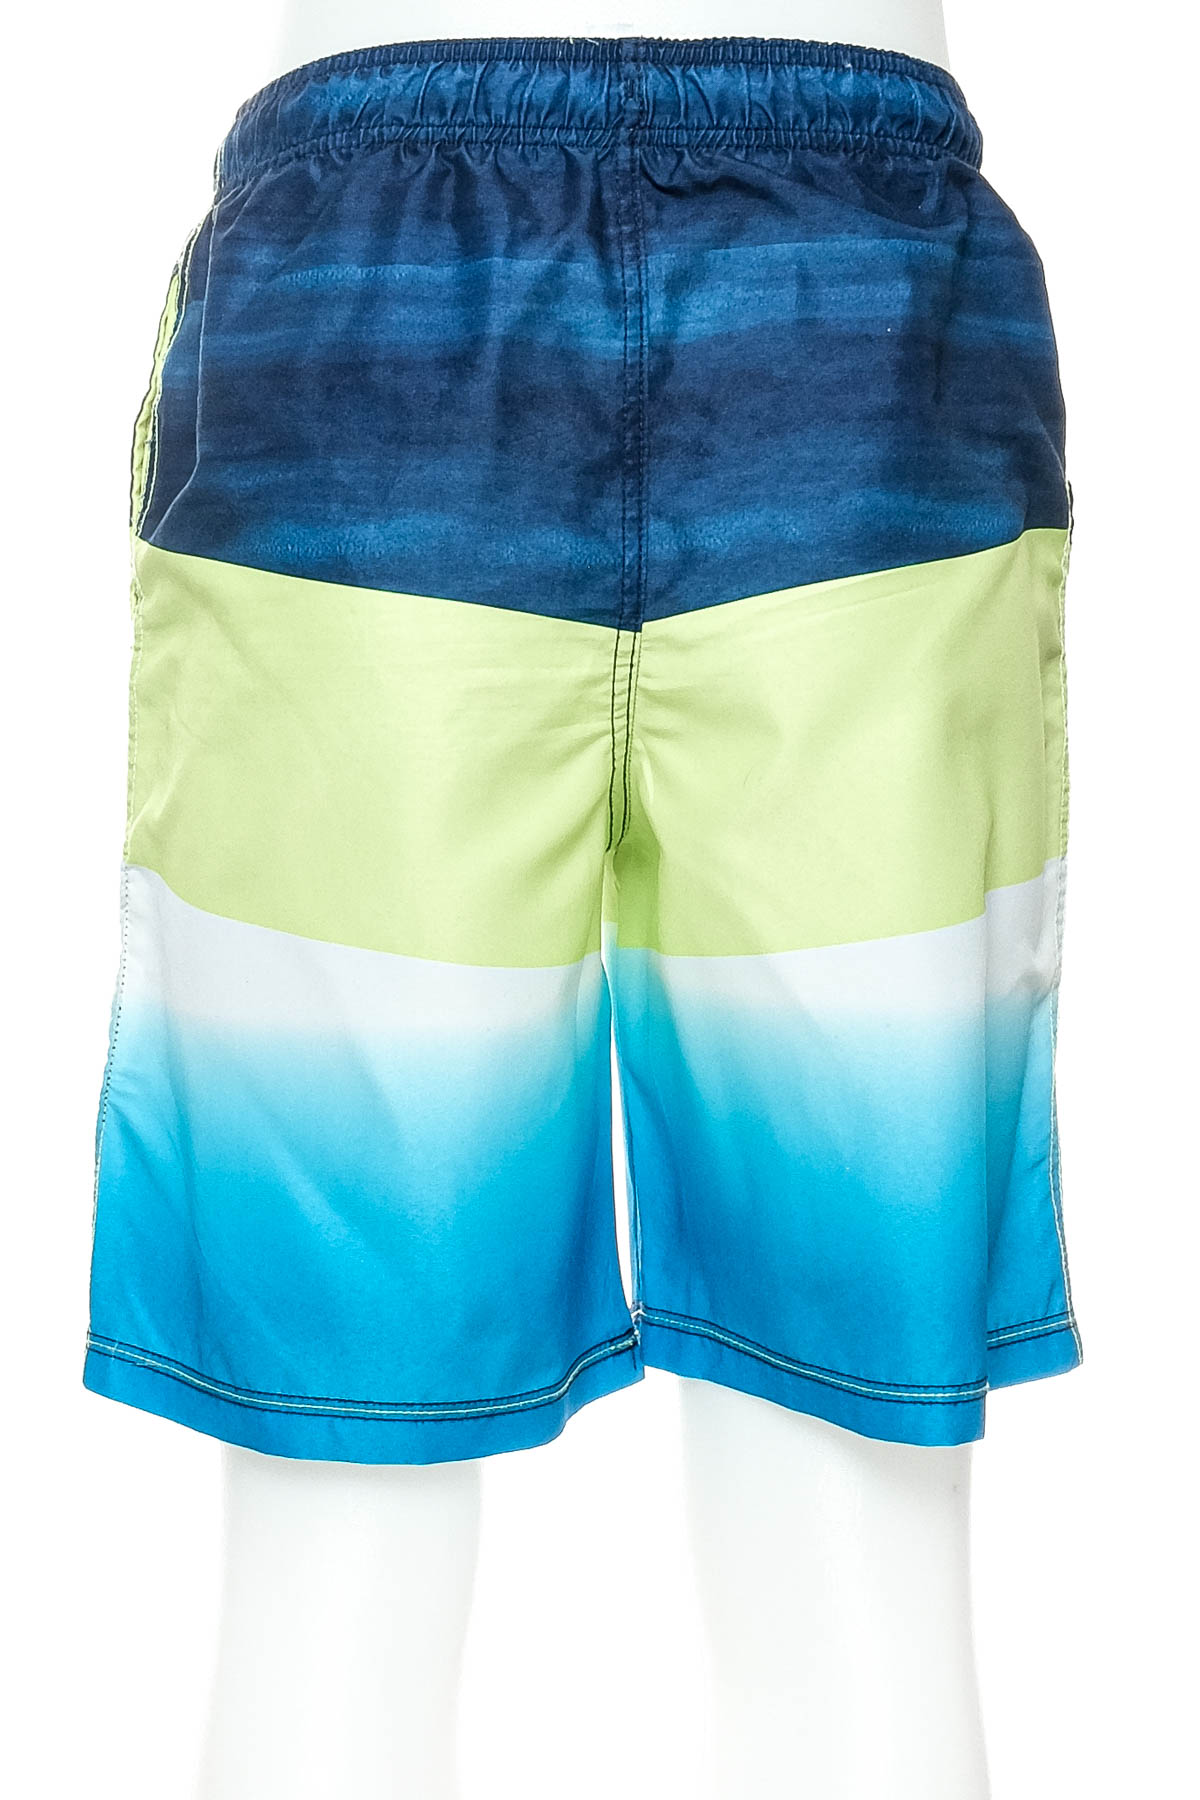 Shorts for boys - C&A - 1